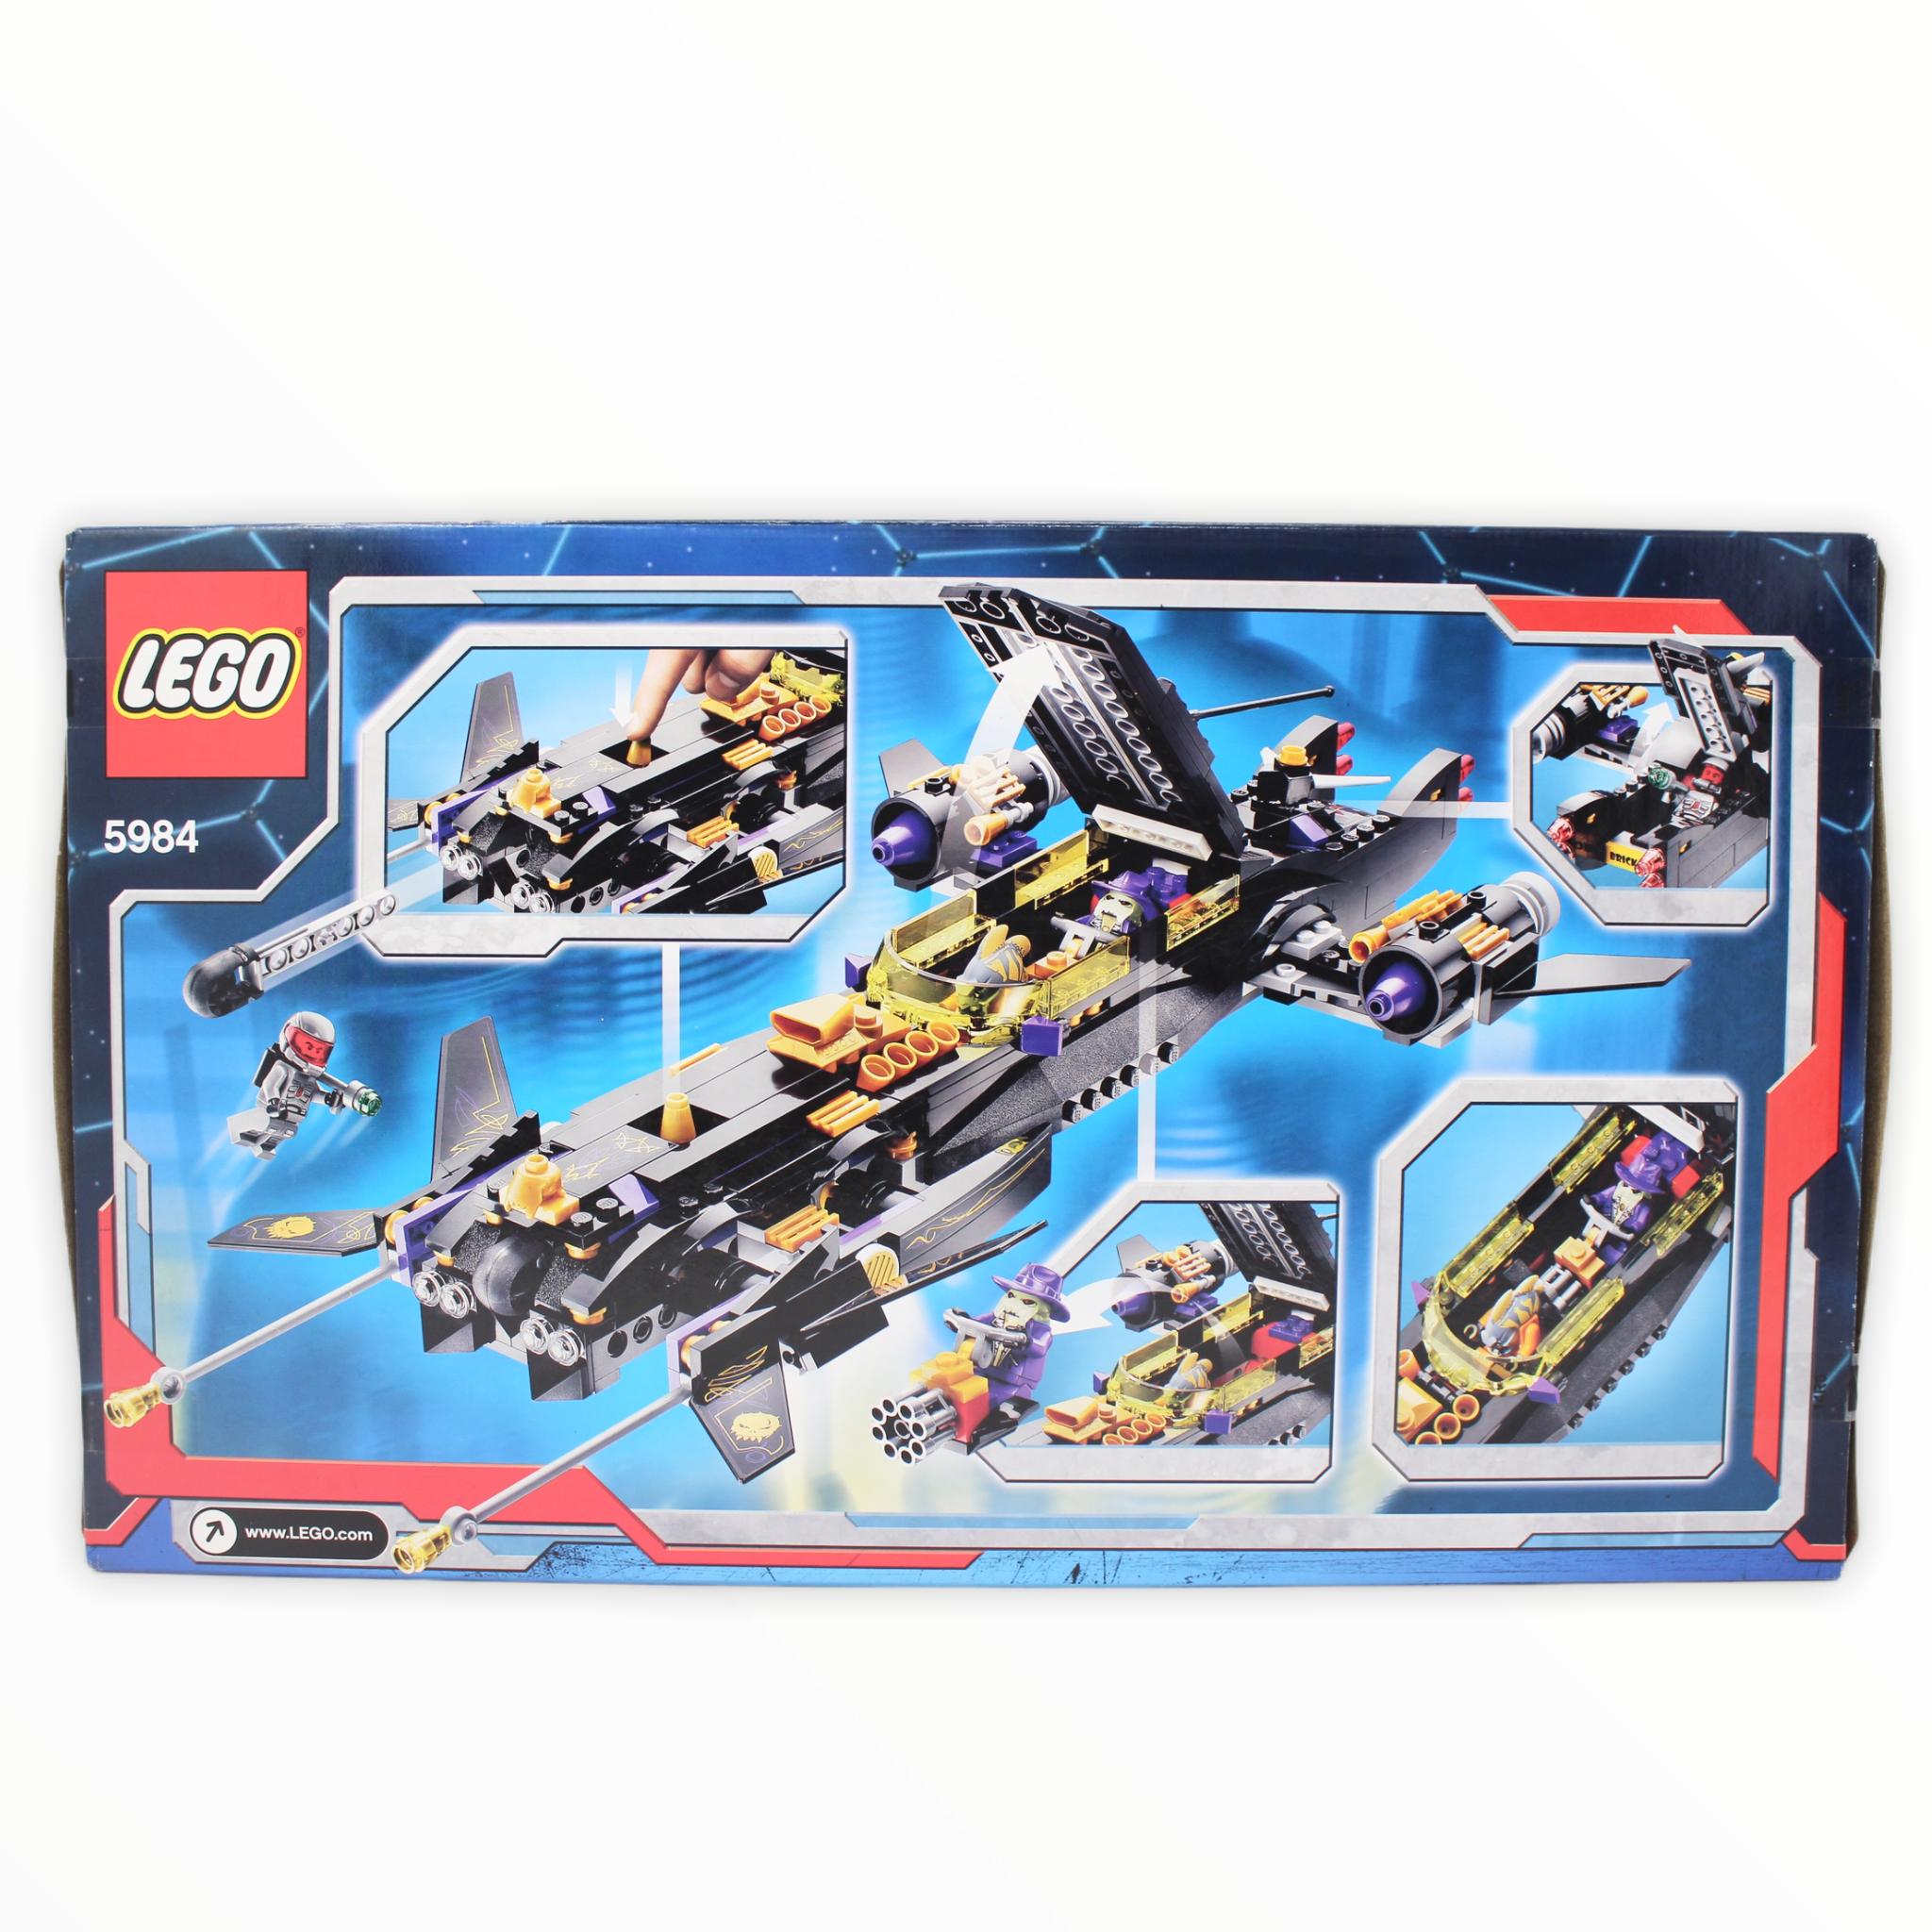 Retired Set 5984 Space Police Lunar Limo